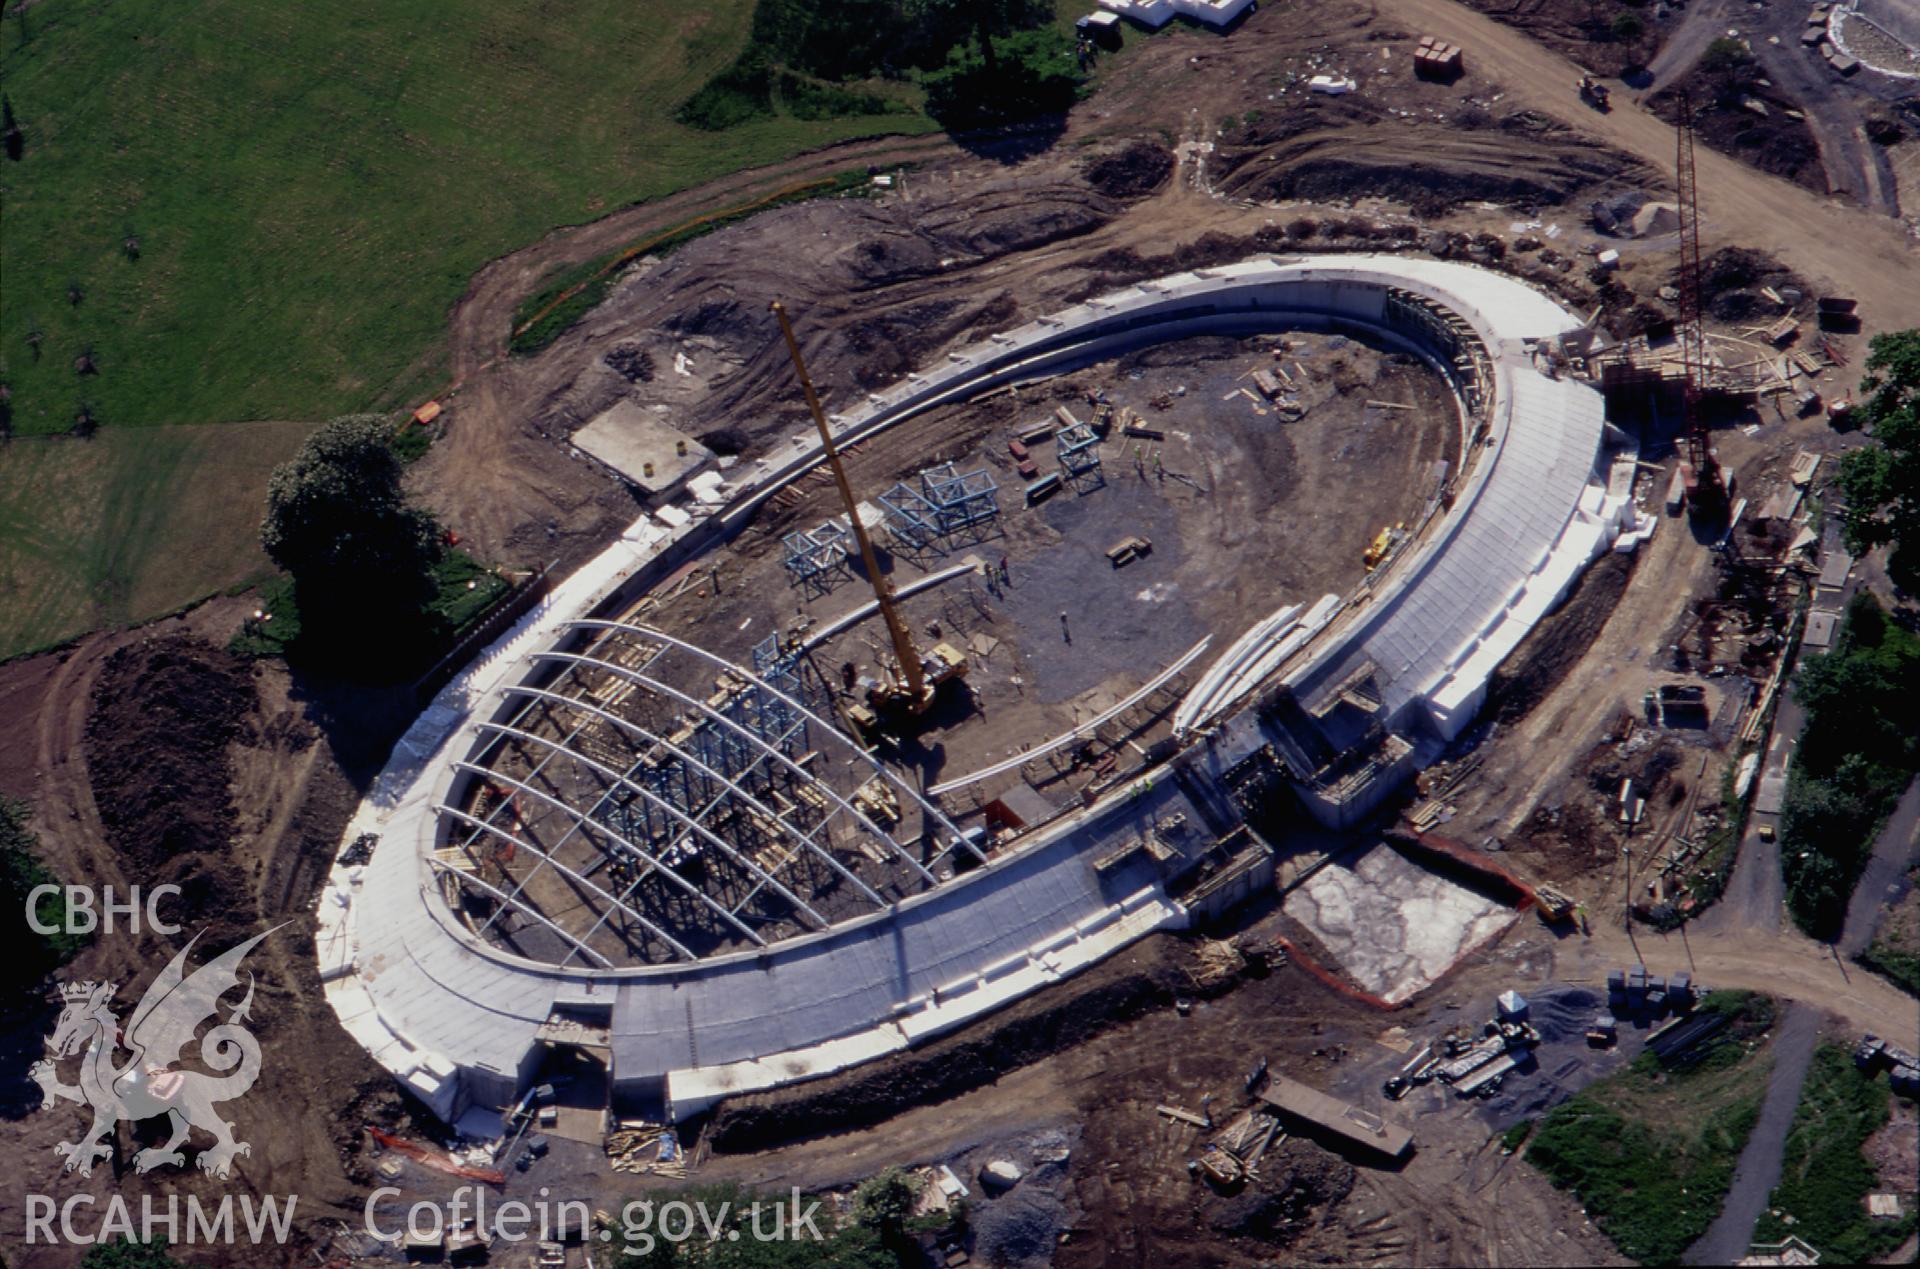 Slide of RCAHMW colour oblique aerial photograph of Glasshouse, National Botanic Gardens under construction, taken by T.G. Driver, 18/5/1998.